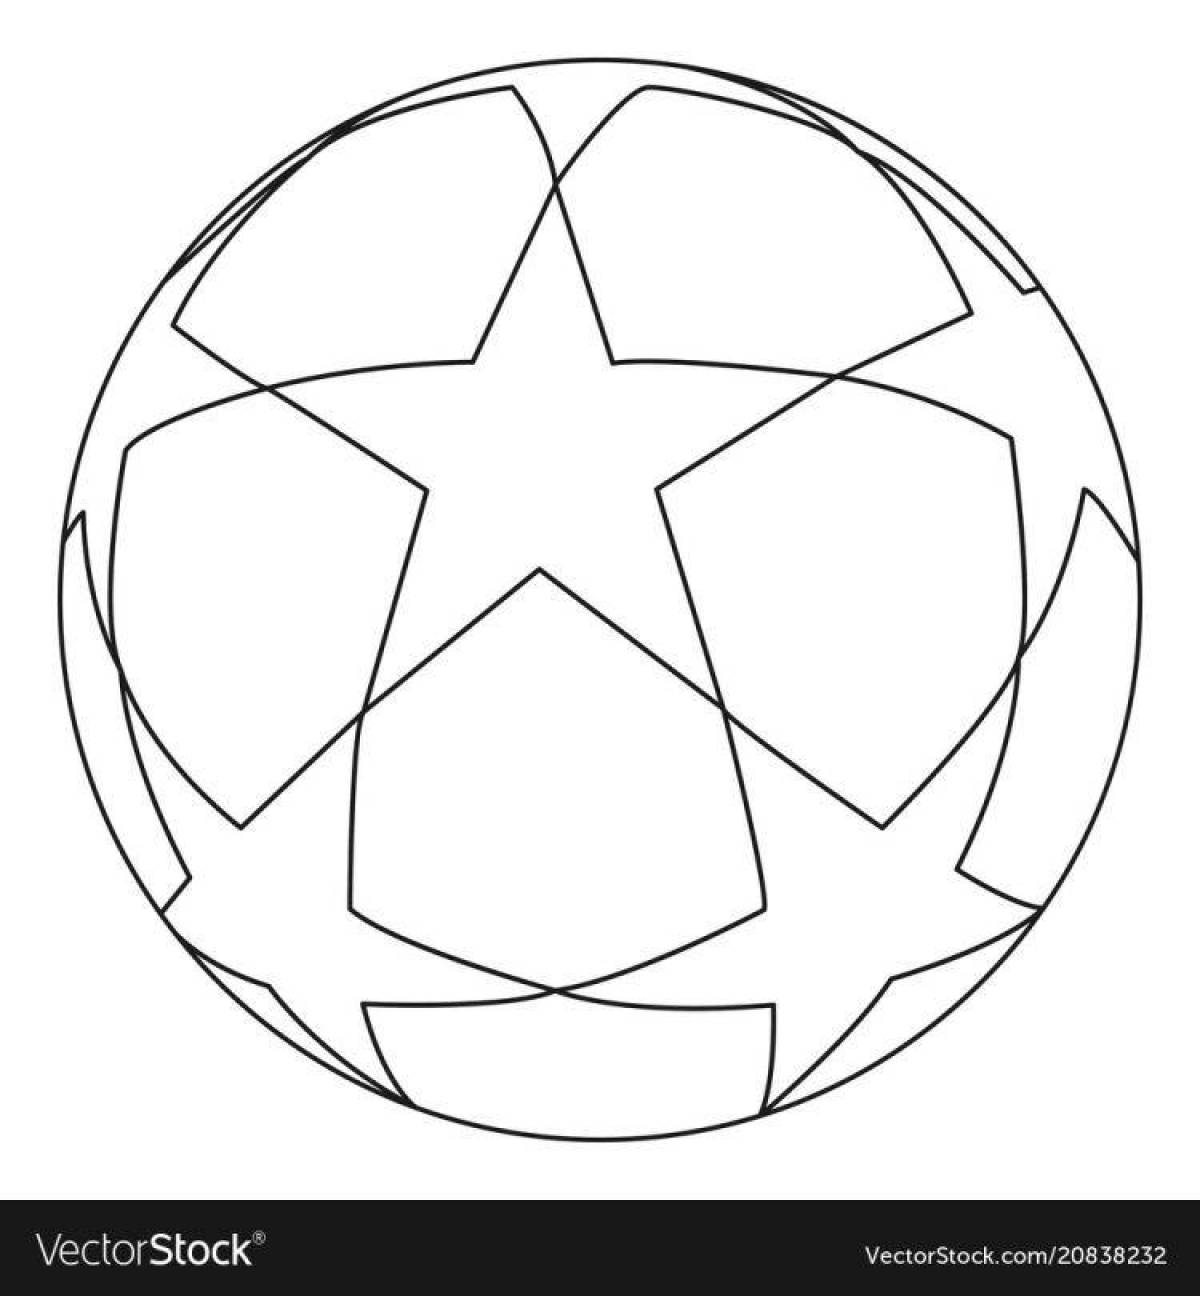 Playful soccer ball coloring page for kids